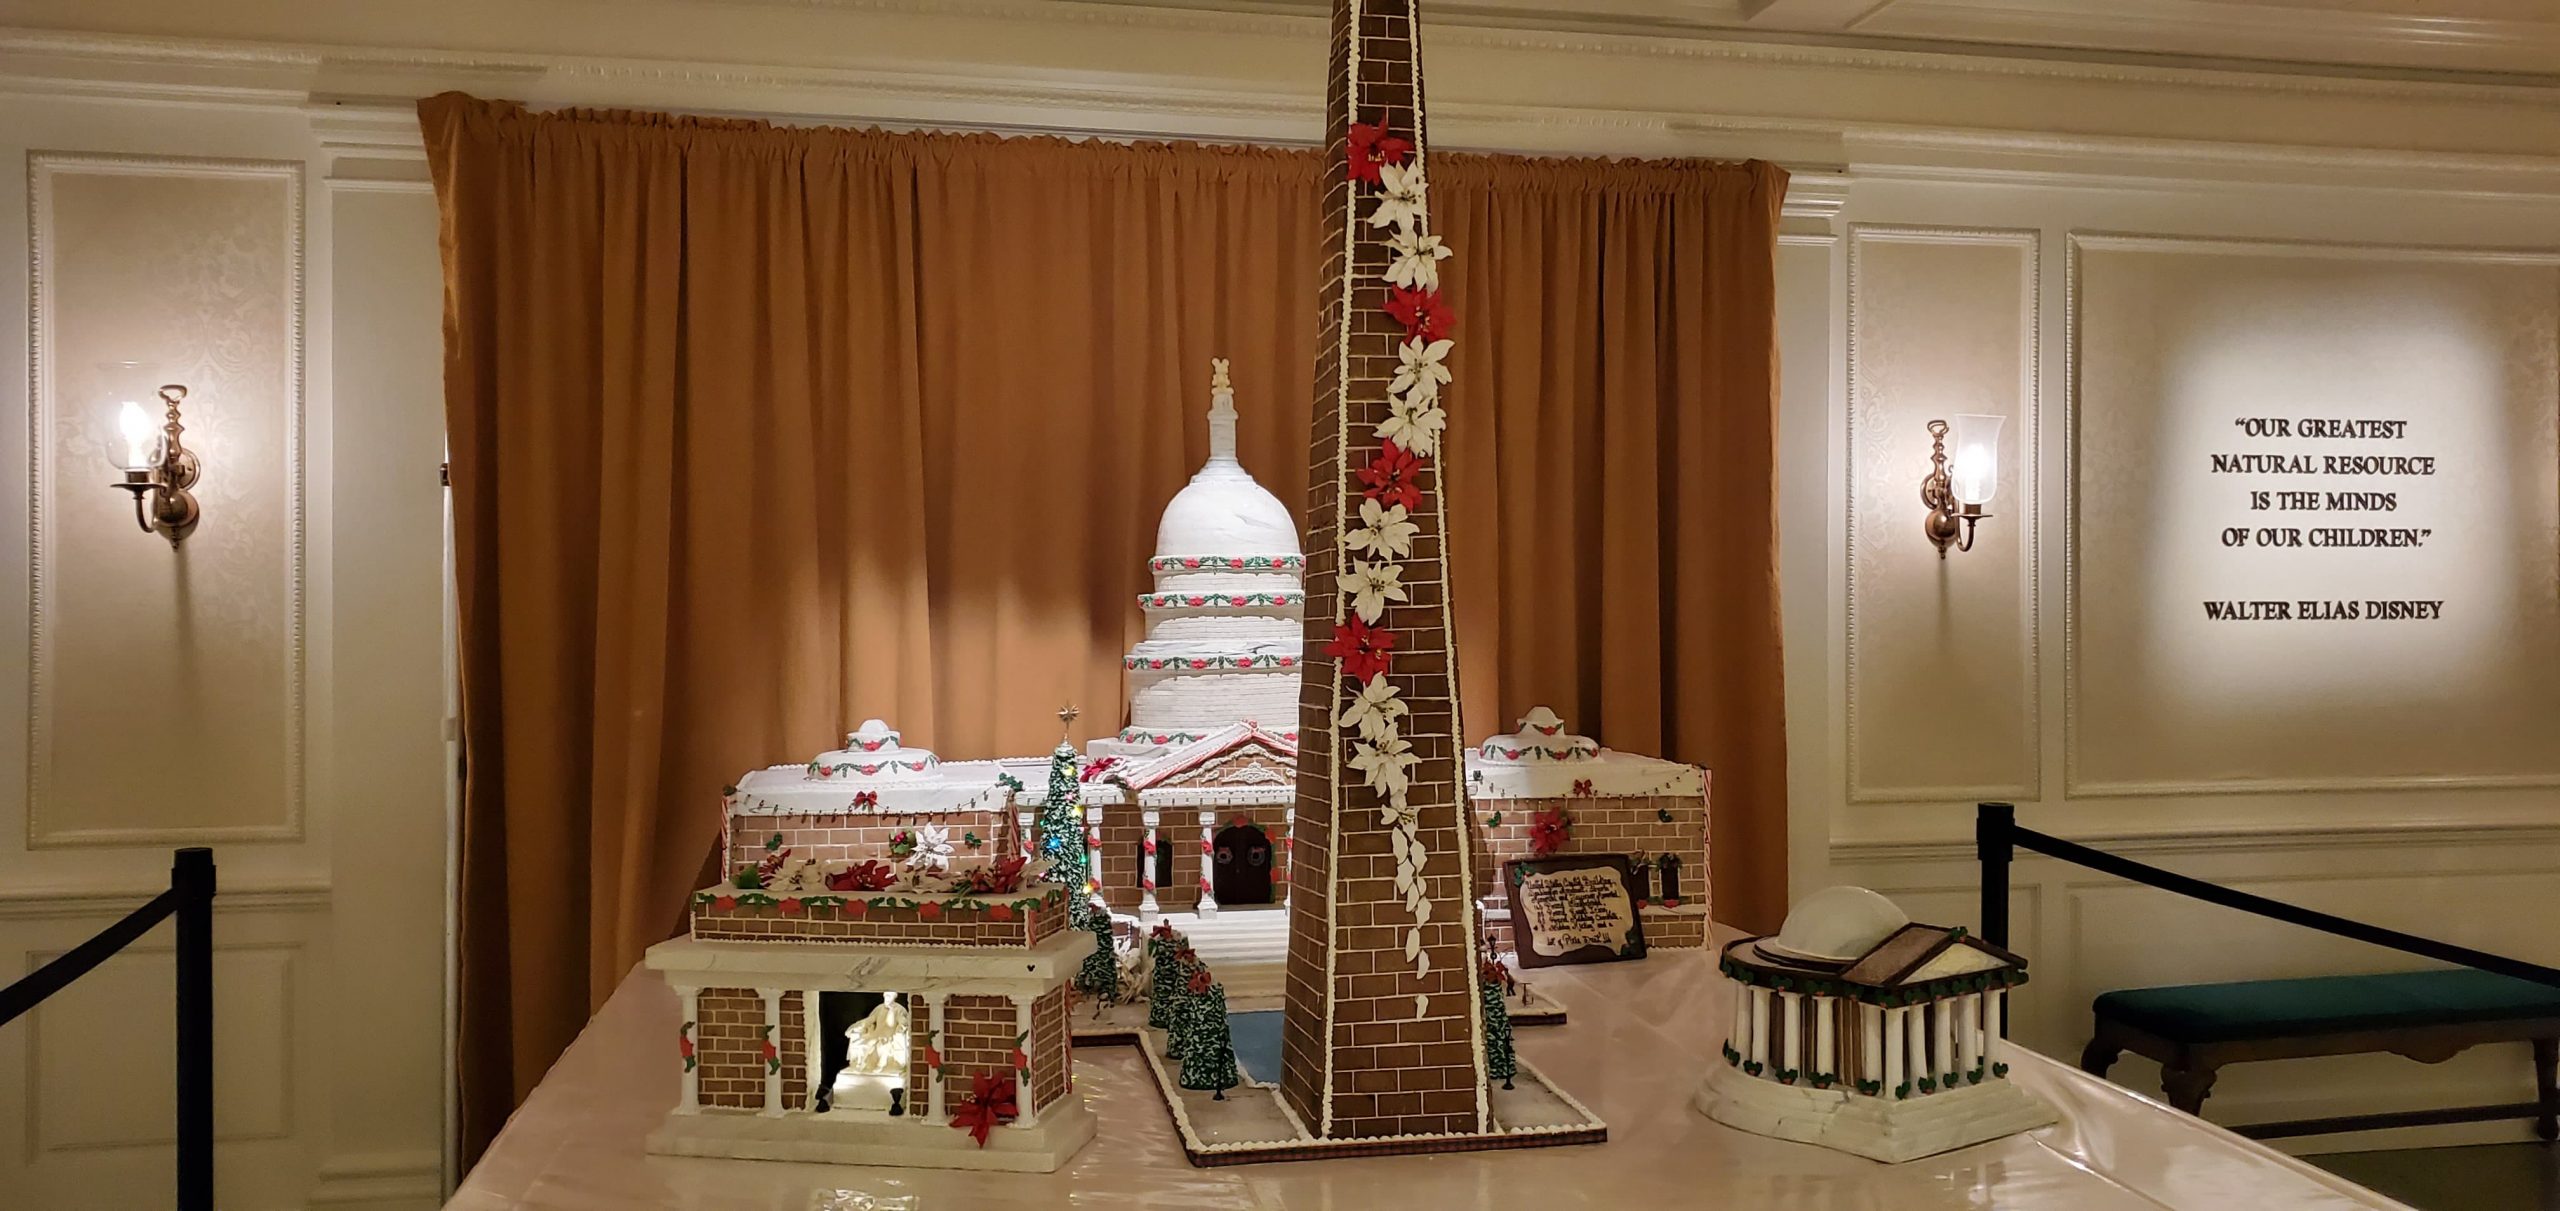 Epcot’s America Pavilion Stuns with Its Gingerbread Display